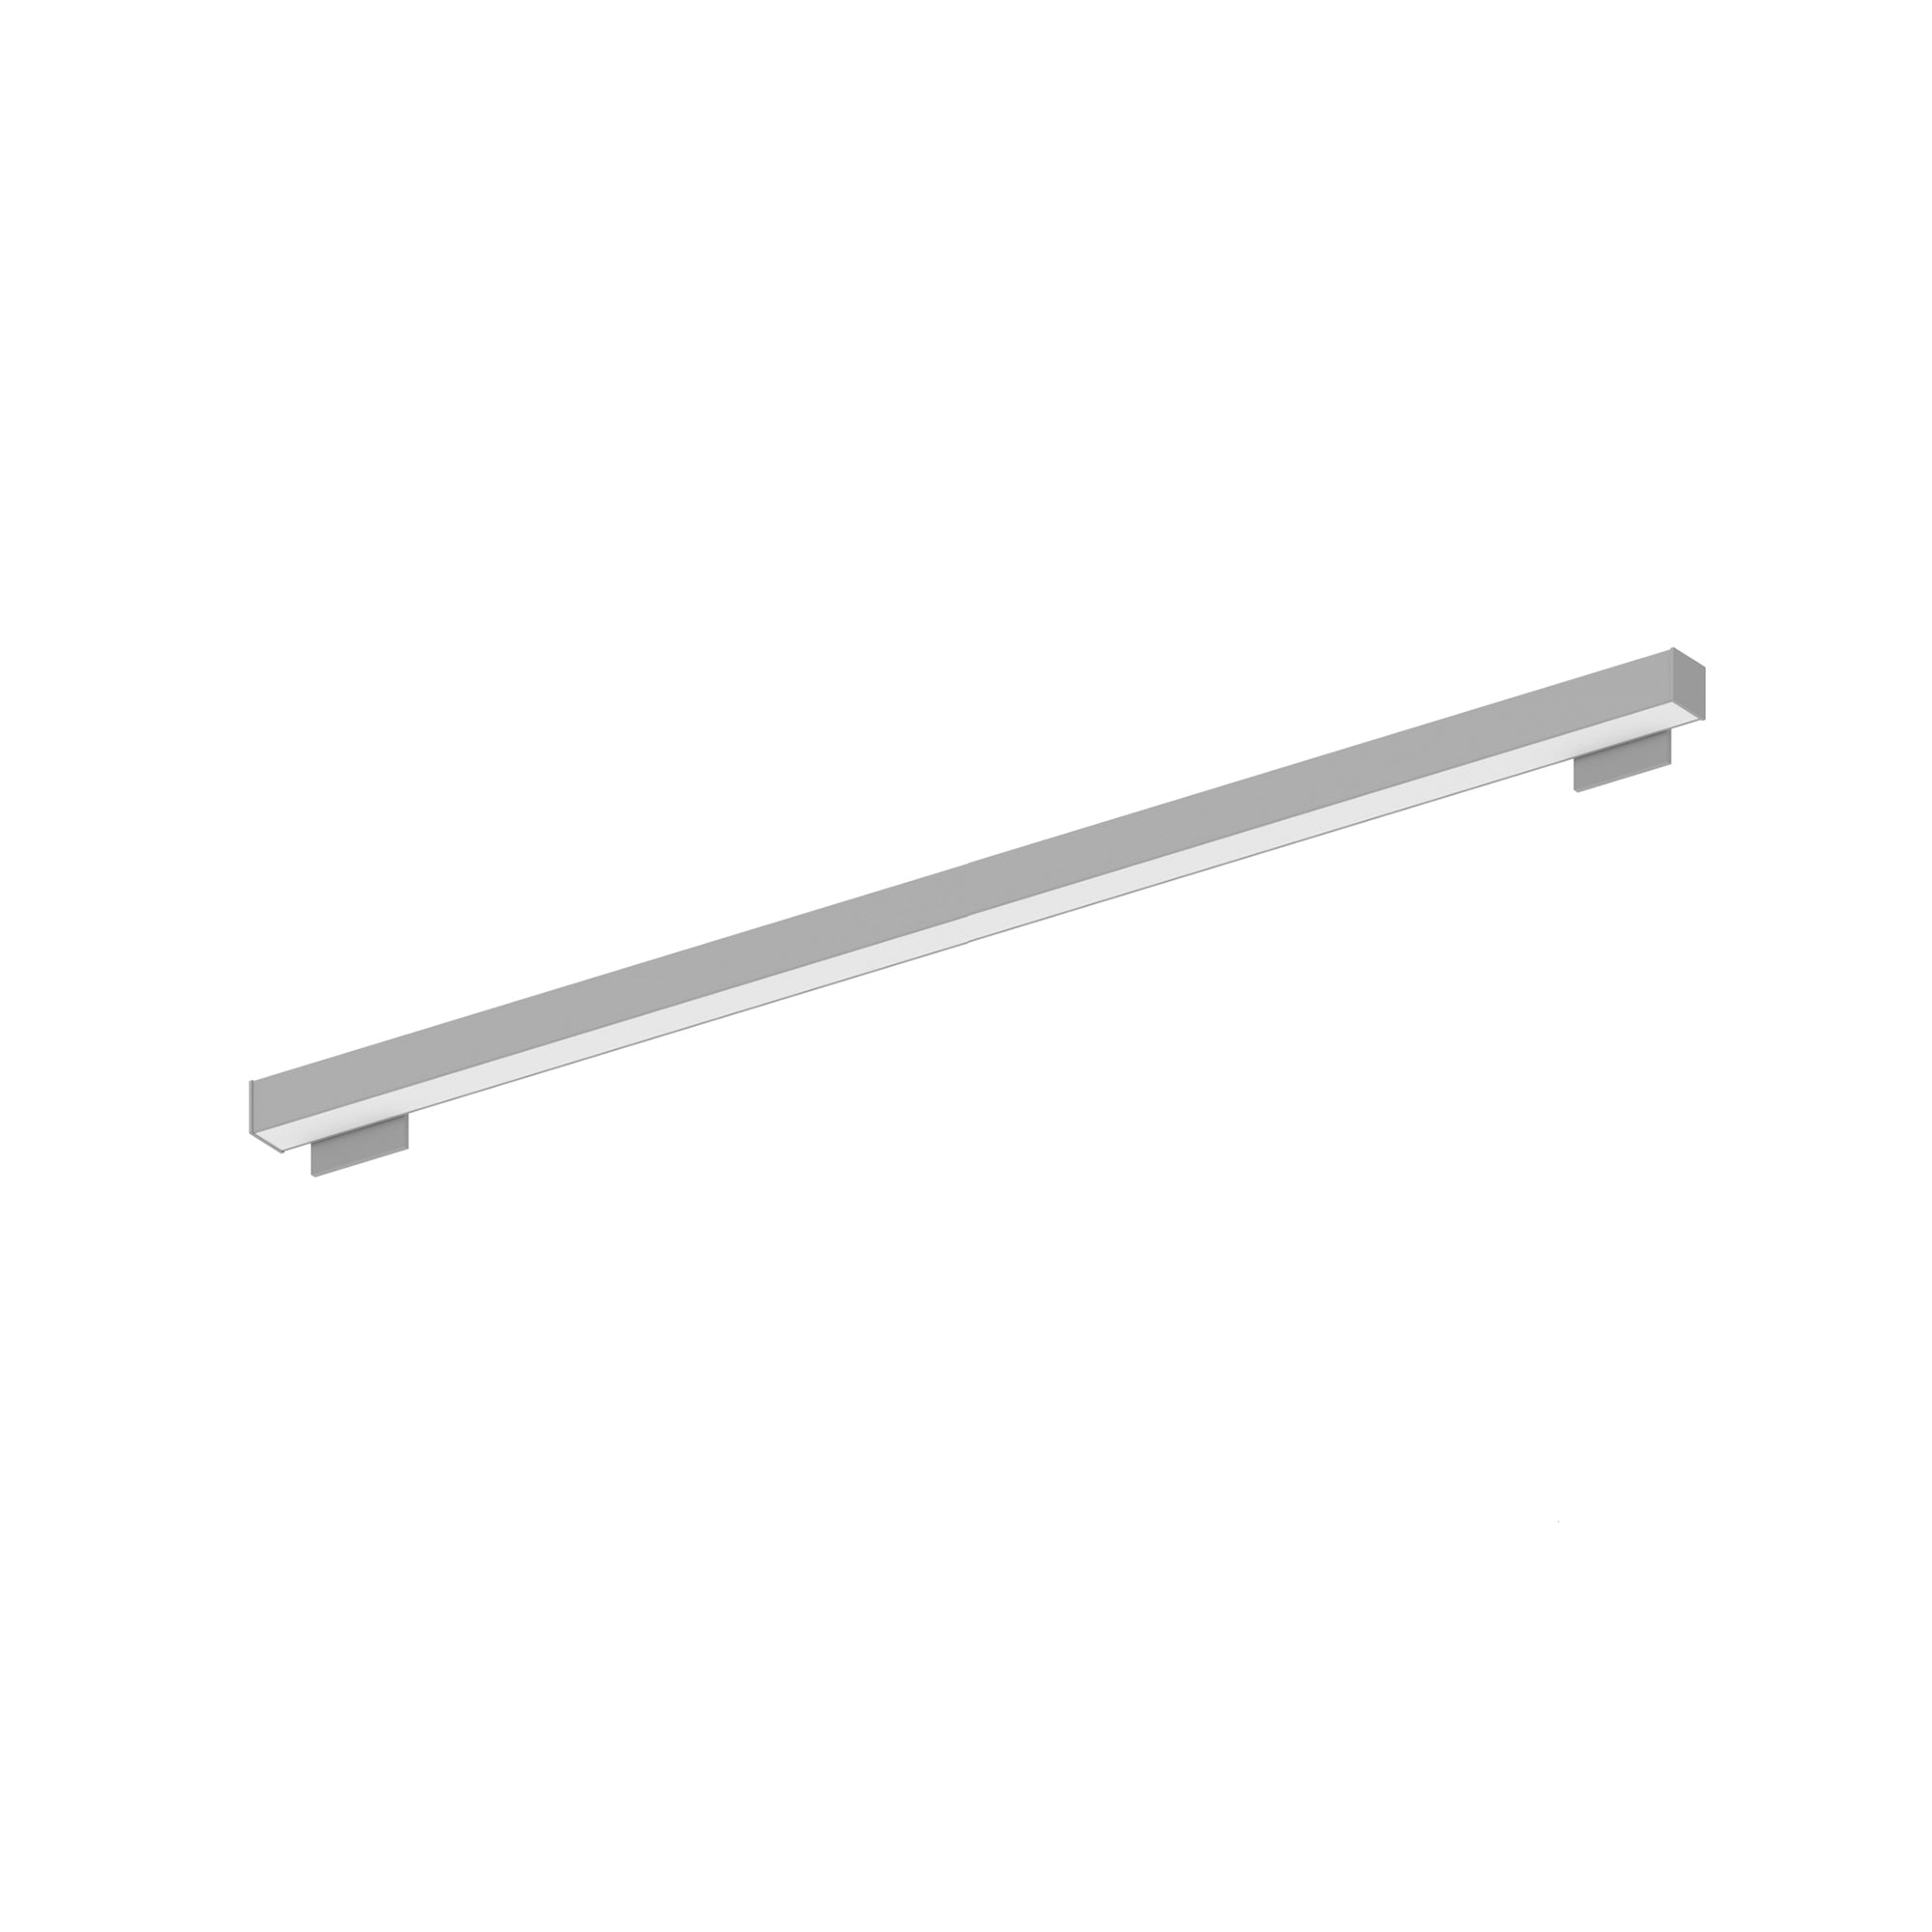 Nora Lighting NWLIN-81035A/L4P-R4 - Linear - 8' L-Line LED Wall Mount Linear, 8400lm / 3500K, 4 Inchx4 Inch Left Plate & 4 Inchx4 Inch Right Plate, Left Power Feed, Aluminum Finish